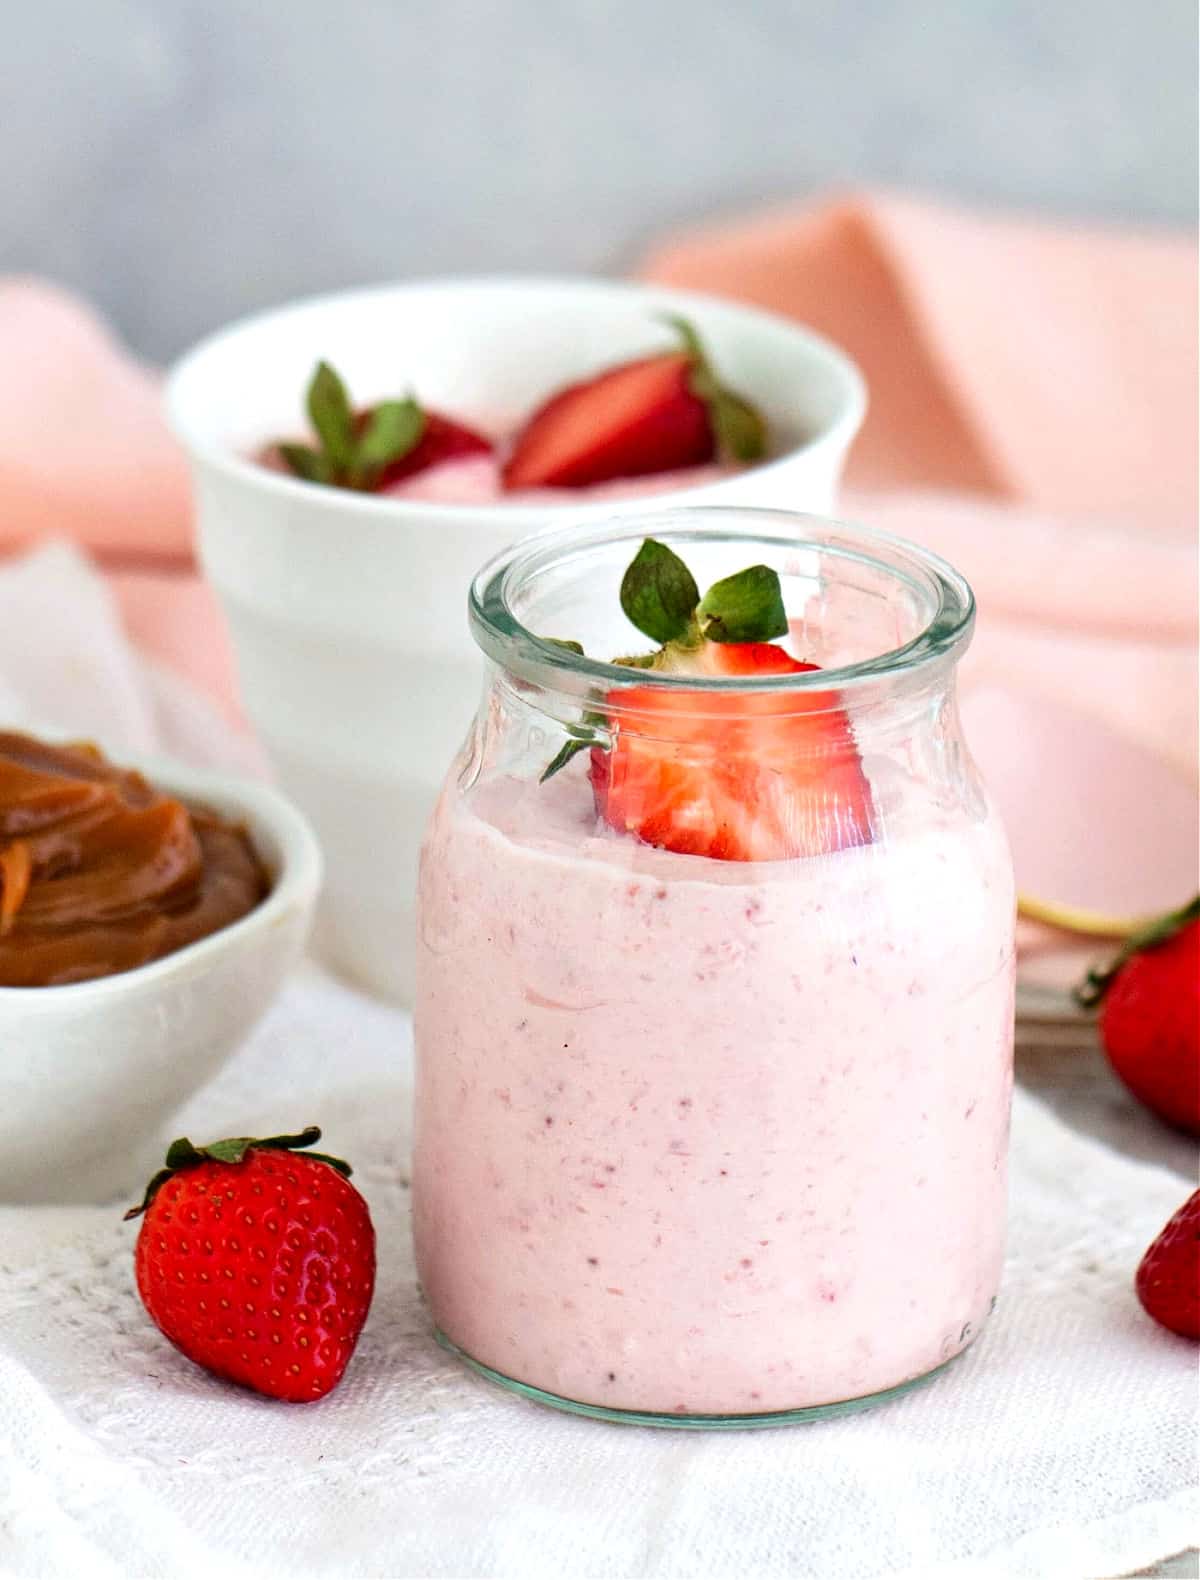 Individual serving of strawberry dessert in glass jar, bowl with berries, pink grey background.